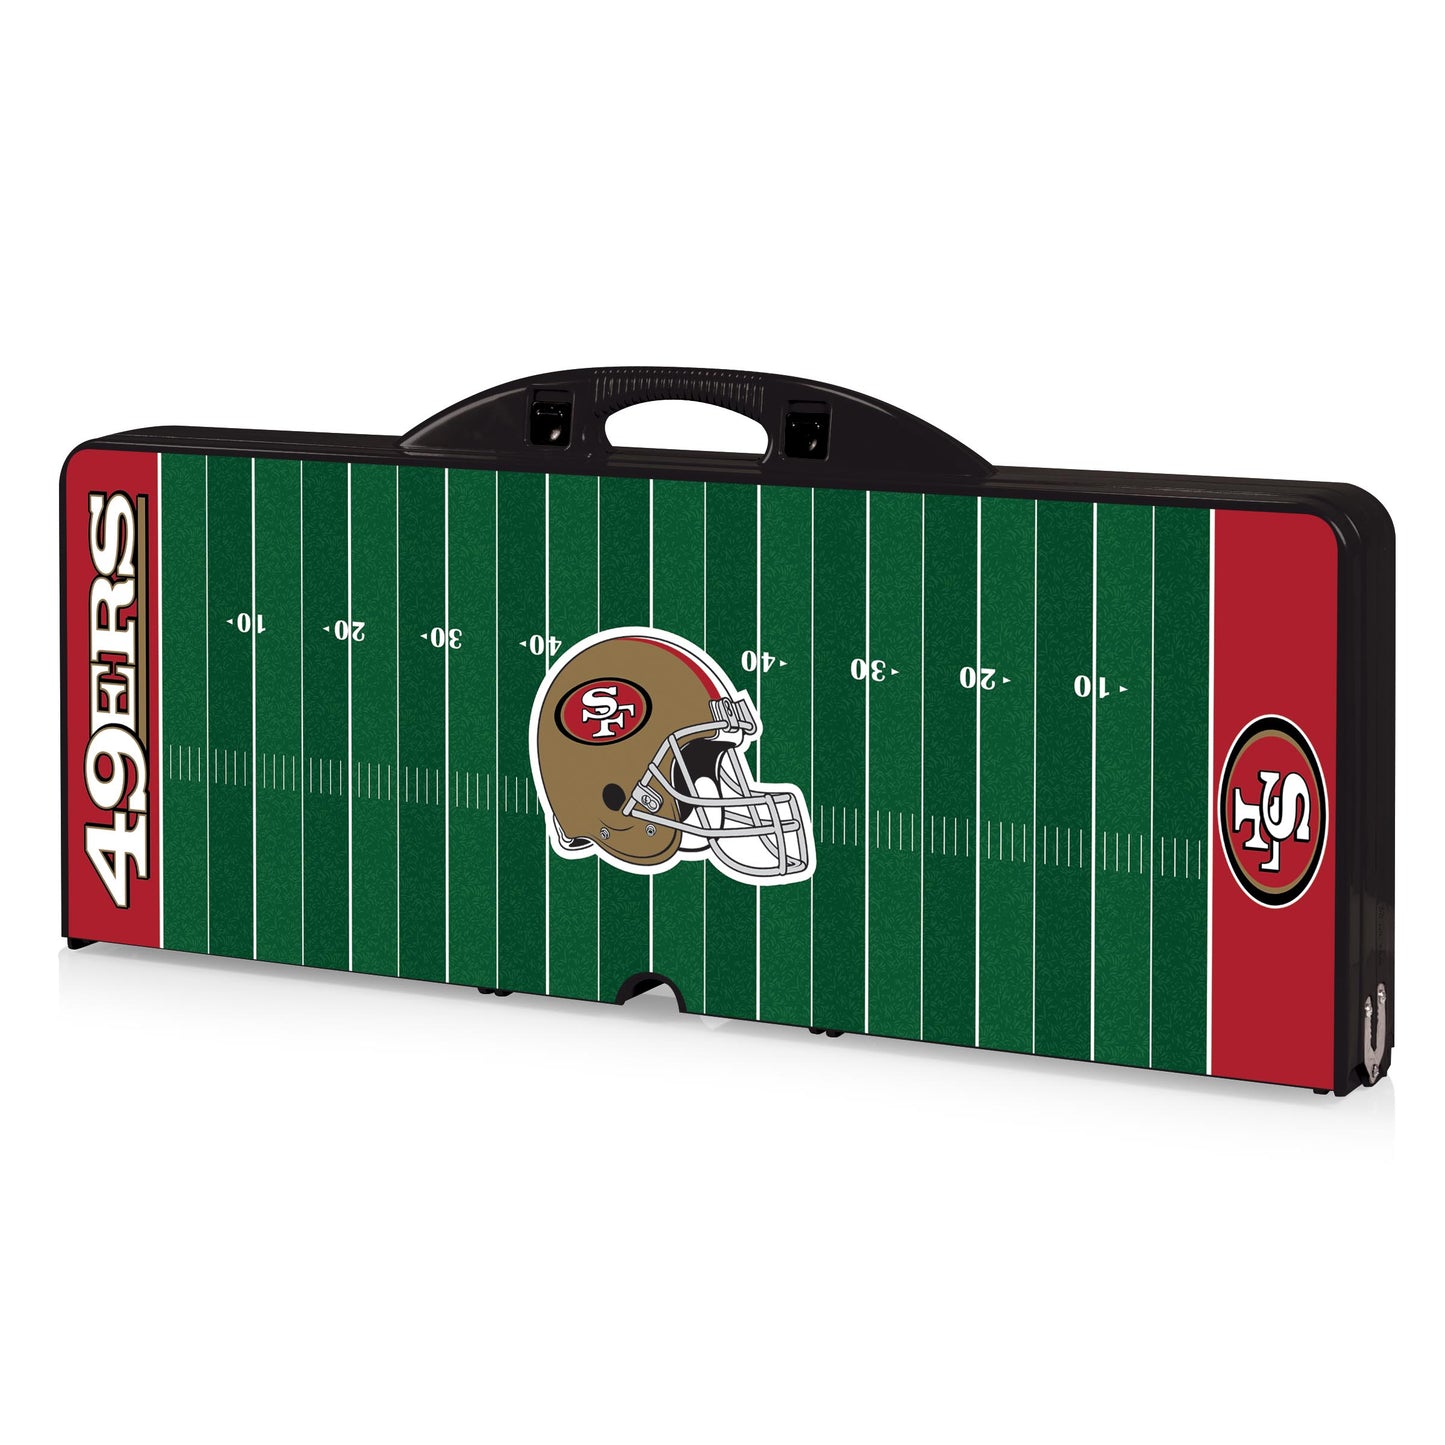 San Francisco 49ers - Picnic Table Portable Folding Table with Seats and Umbrella